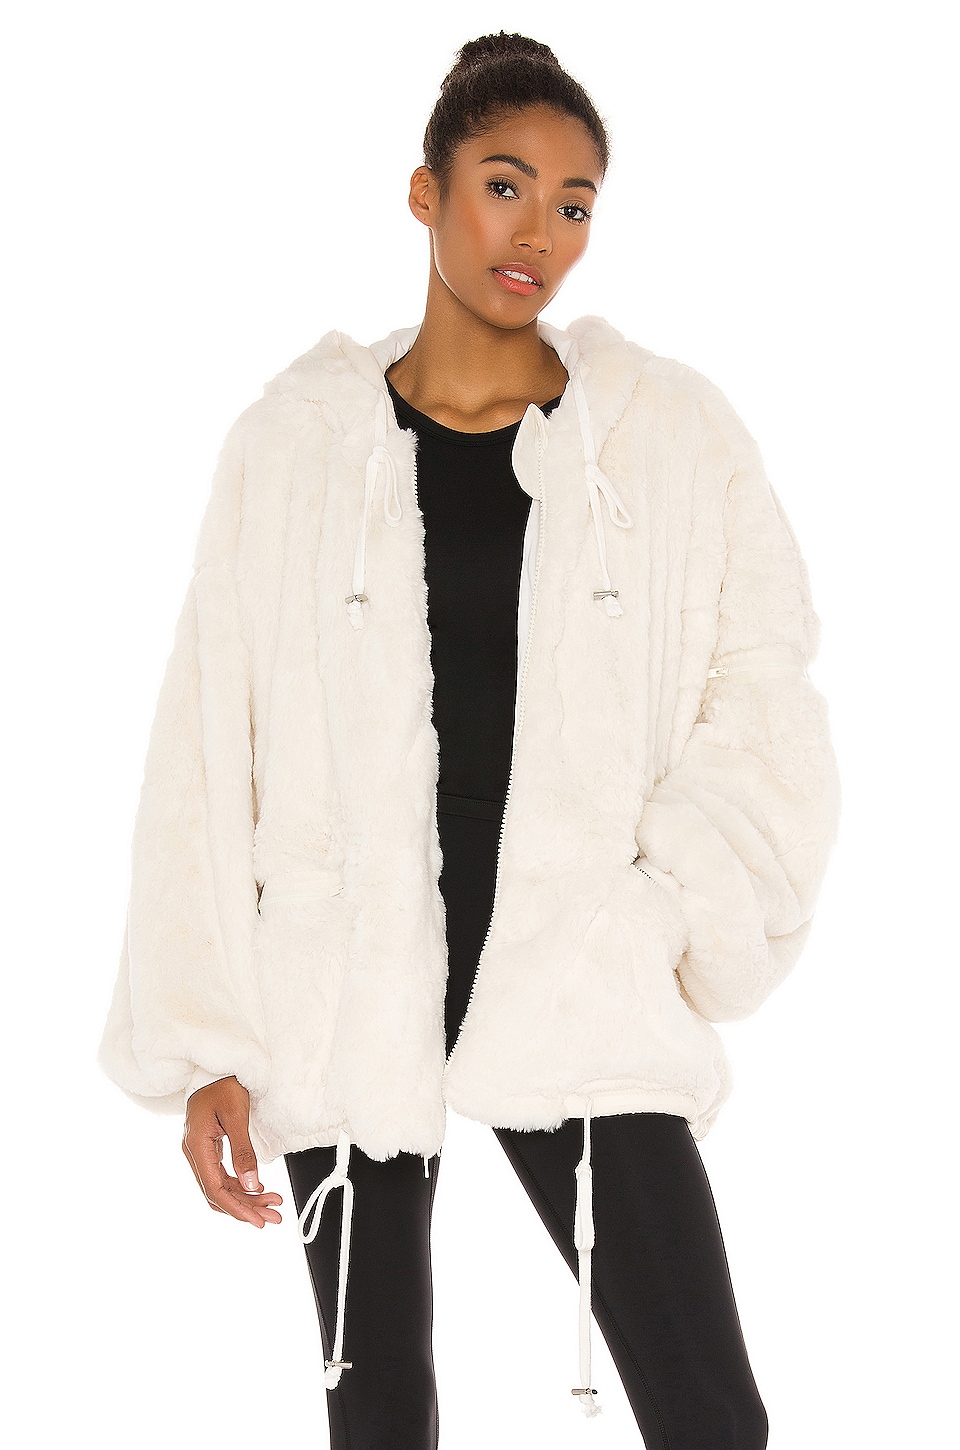 Free People X FP Movement Take A Moment Jacket in Ivory | REVOLVE